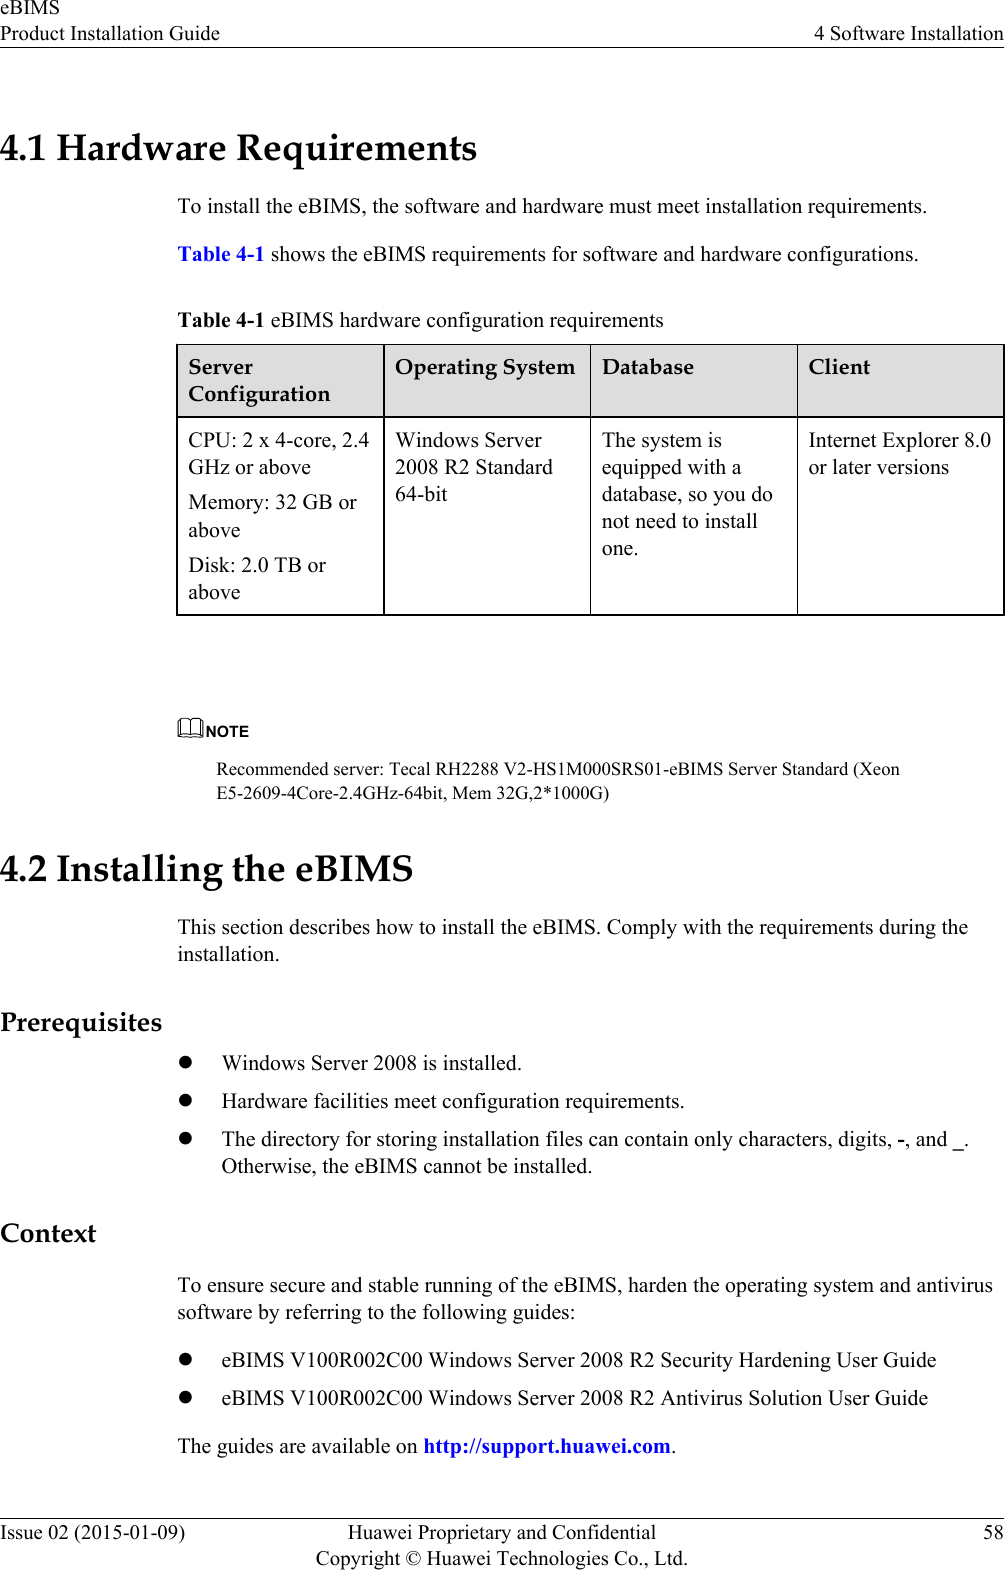 4.1 Hardware RequirementsTo install the eBIMS, the software and hardware must meet installation requirements.Table 4-1 shows the eBIMS requirements for software and hardware configurations.Table 4-1 eBIMS hardware configuration requirementsServerConfigurationOperating System Database ClientCPU: 2 x 4-core, 2.4GHz or aboveMemory: 32 GB oraboveDisk: 2.0 TB oraboveWindows Server2008 R2 Standard64-bitThe system isequipped with adatabase, so you donot need to installone.Internet Explorer 8.0or later versions NOTERecommended server: Tecal RH2288 V2-HS1M000SRS01-eBIMS Server Standard (XeonE5-2609-4Core-2.4GHz-64bit, Mem 32G,2*1000G)4.2 Installing the eBIMSThis section describes how to install the eBIMS. Comply with the requirements during theinstallation.PrerequisiteslWindows Server 2008 is installed.lHardware facilities meet configuration requirements.lThe directory for storing installation files can contain only characters, digits, -, and _.Otherwise, the eBIMS cannot be installed.ContextTo ensure secure and stable running of the eBIMS, harden the operating system and antivirussoftware by referring to the following guides:leBIMS V100R002C00 Windows Server 2008 R2 Security Hardening User GuideleBIMS V100R002C00 Windows Server 2008 R2 Antivirus Solution User GuideThe guides are available on http://support.huawei.com.eBIMSProduct Installation Guide 4 Software InstallationIssue 02 (2015-01-09) Huawei Proprietary and ConfidentialCopyright © Huawei Technologies Co., Ltd.58